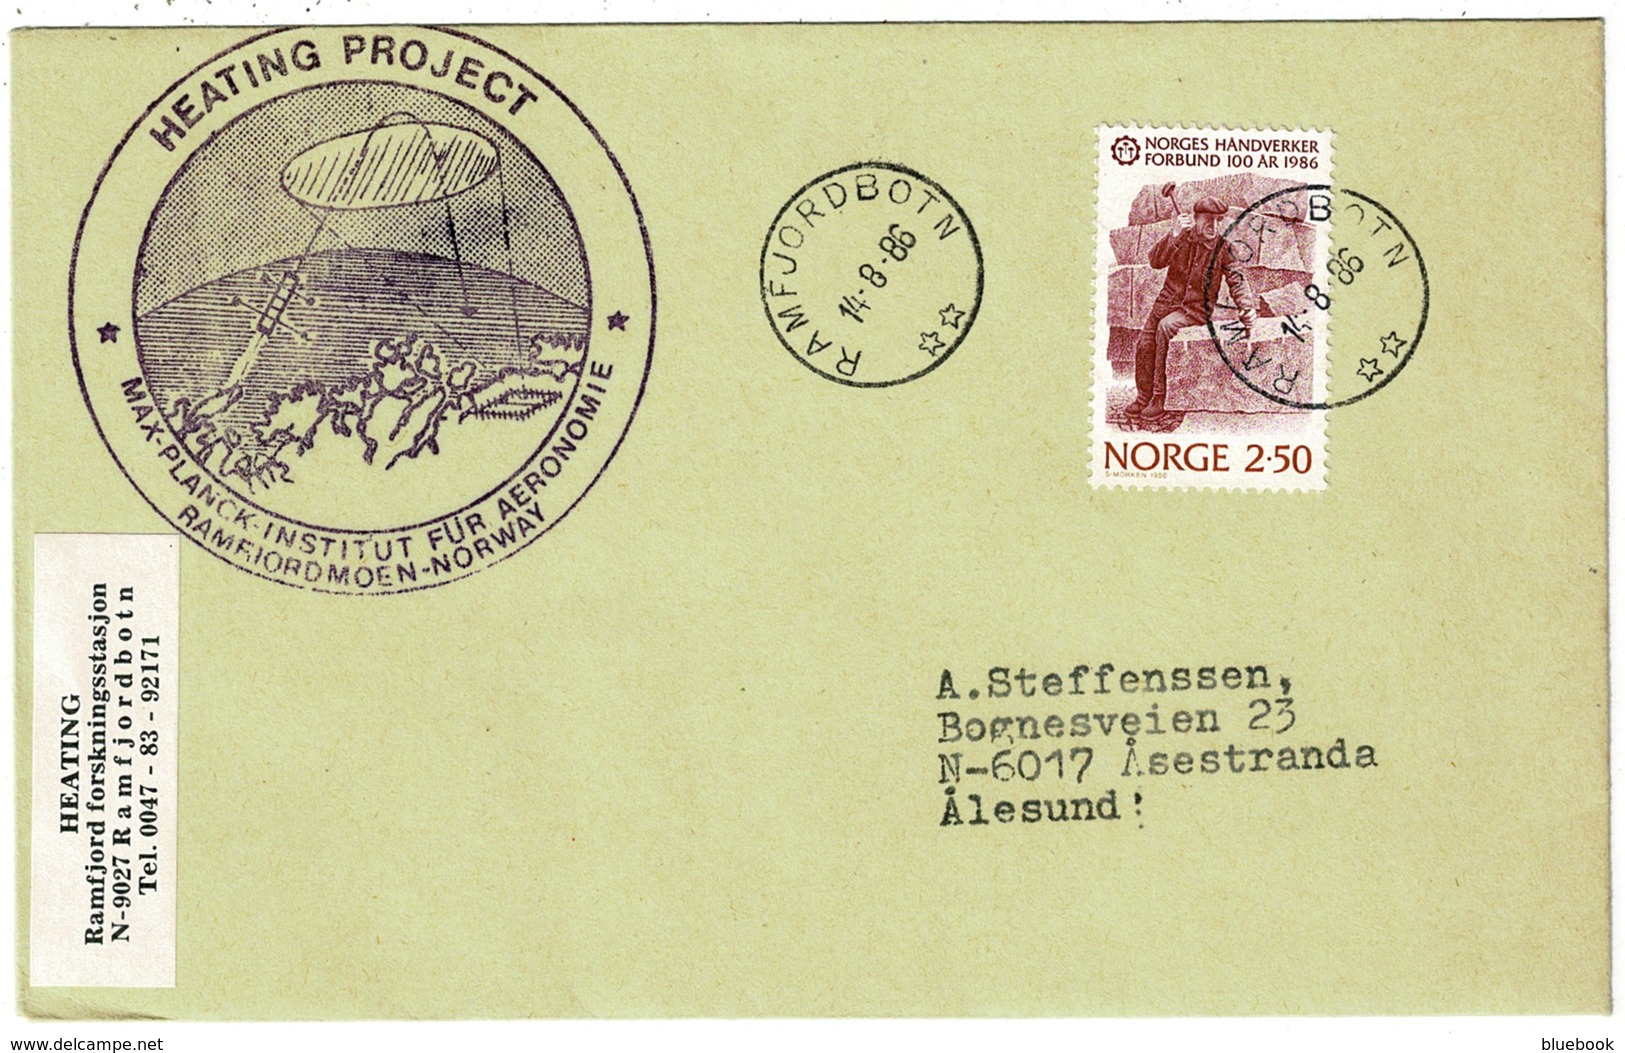 Ref 1281 - 1986 Norway Cover - Ramfjordbotn Heating Project Cachet - Unusual - Covers & Documents